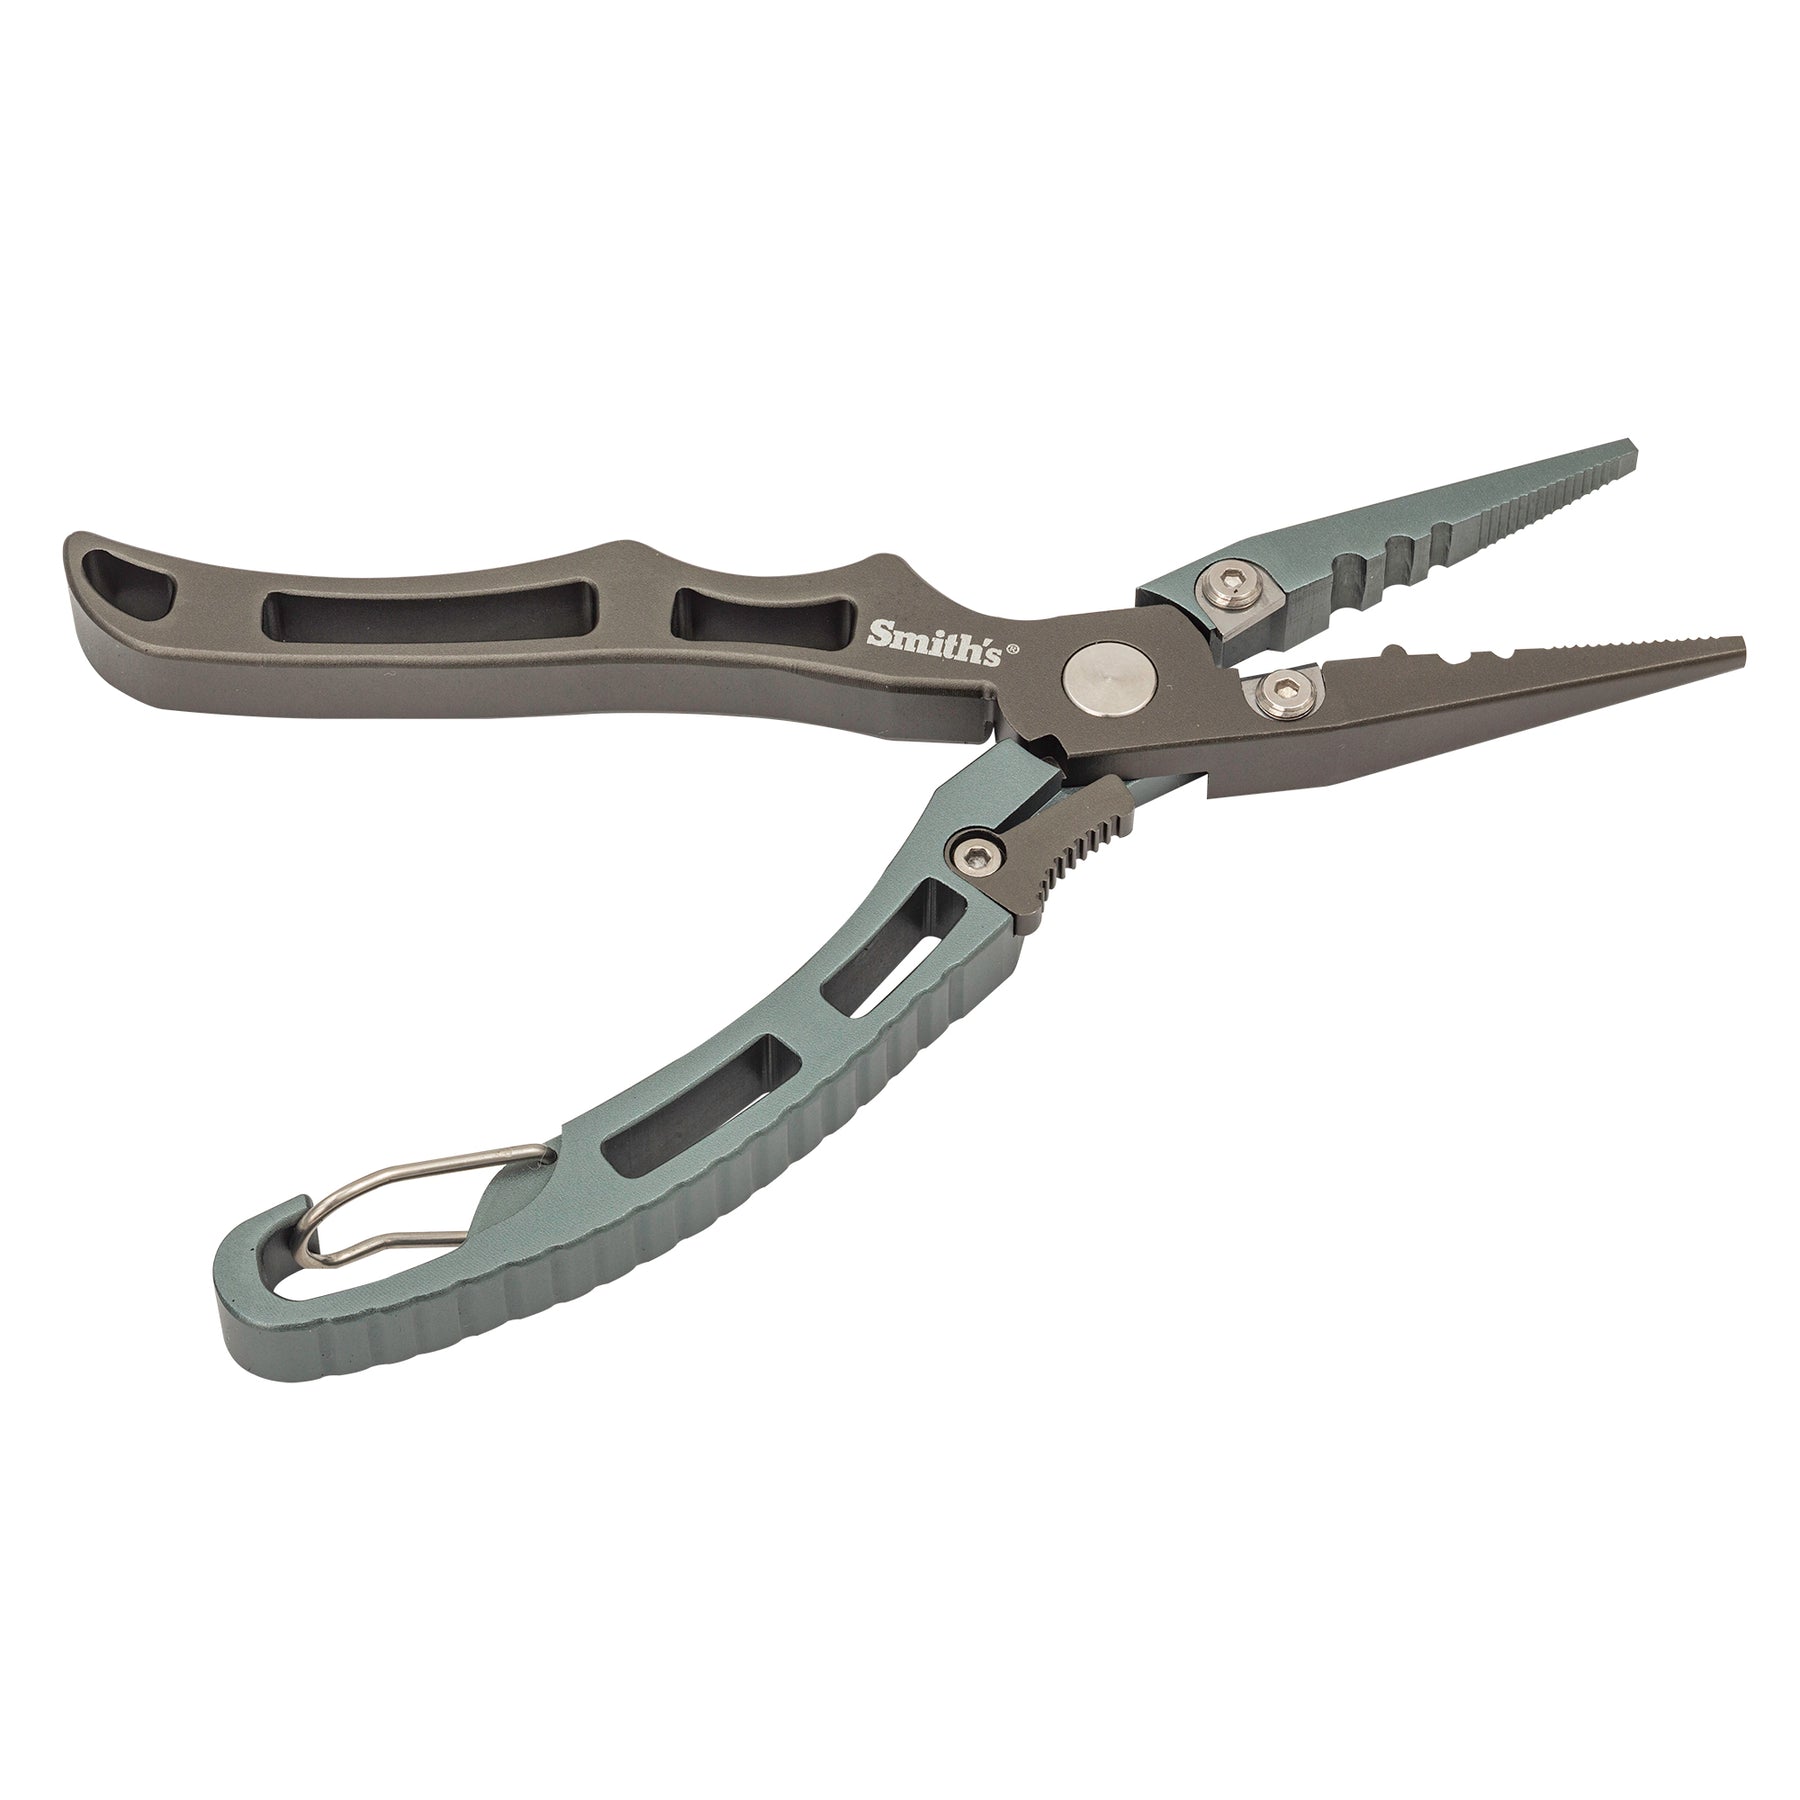 fishing pliers 23cm aluminum stainless steel